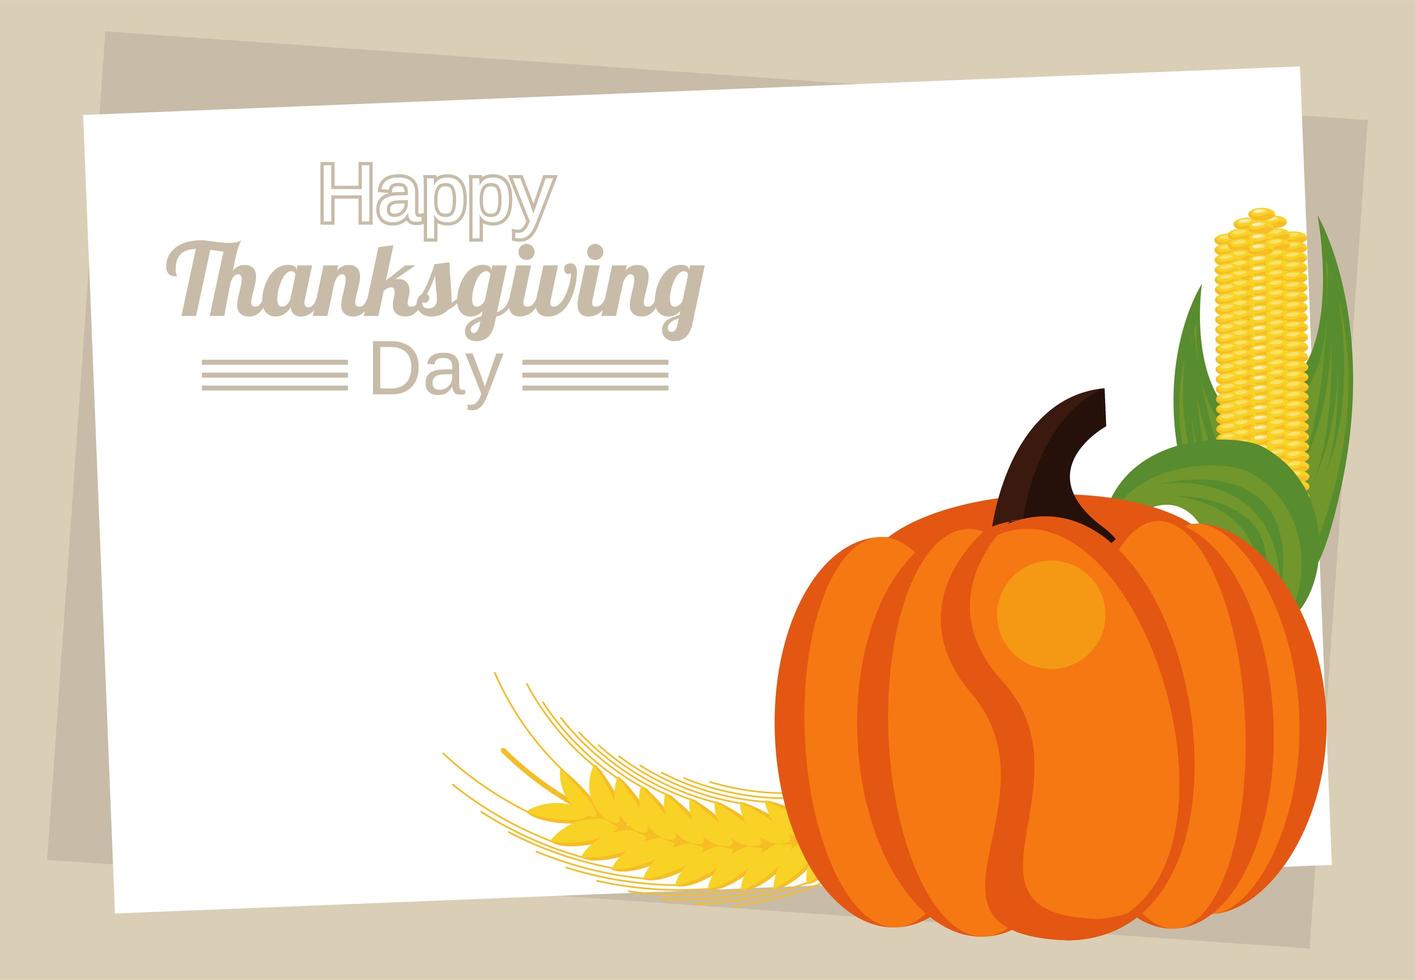 happy thanksgiving day lettering with pumpkin and corn cob vector